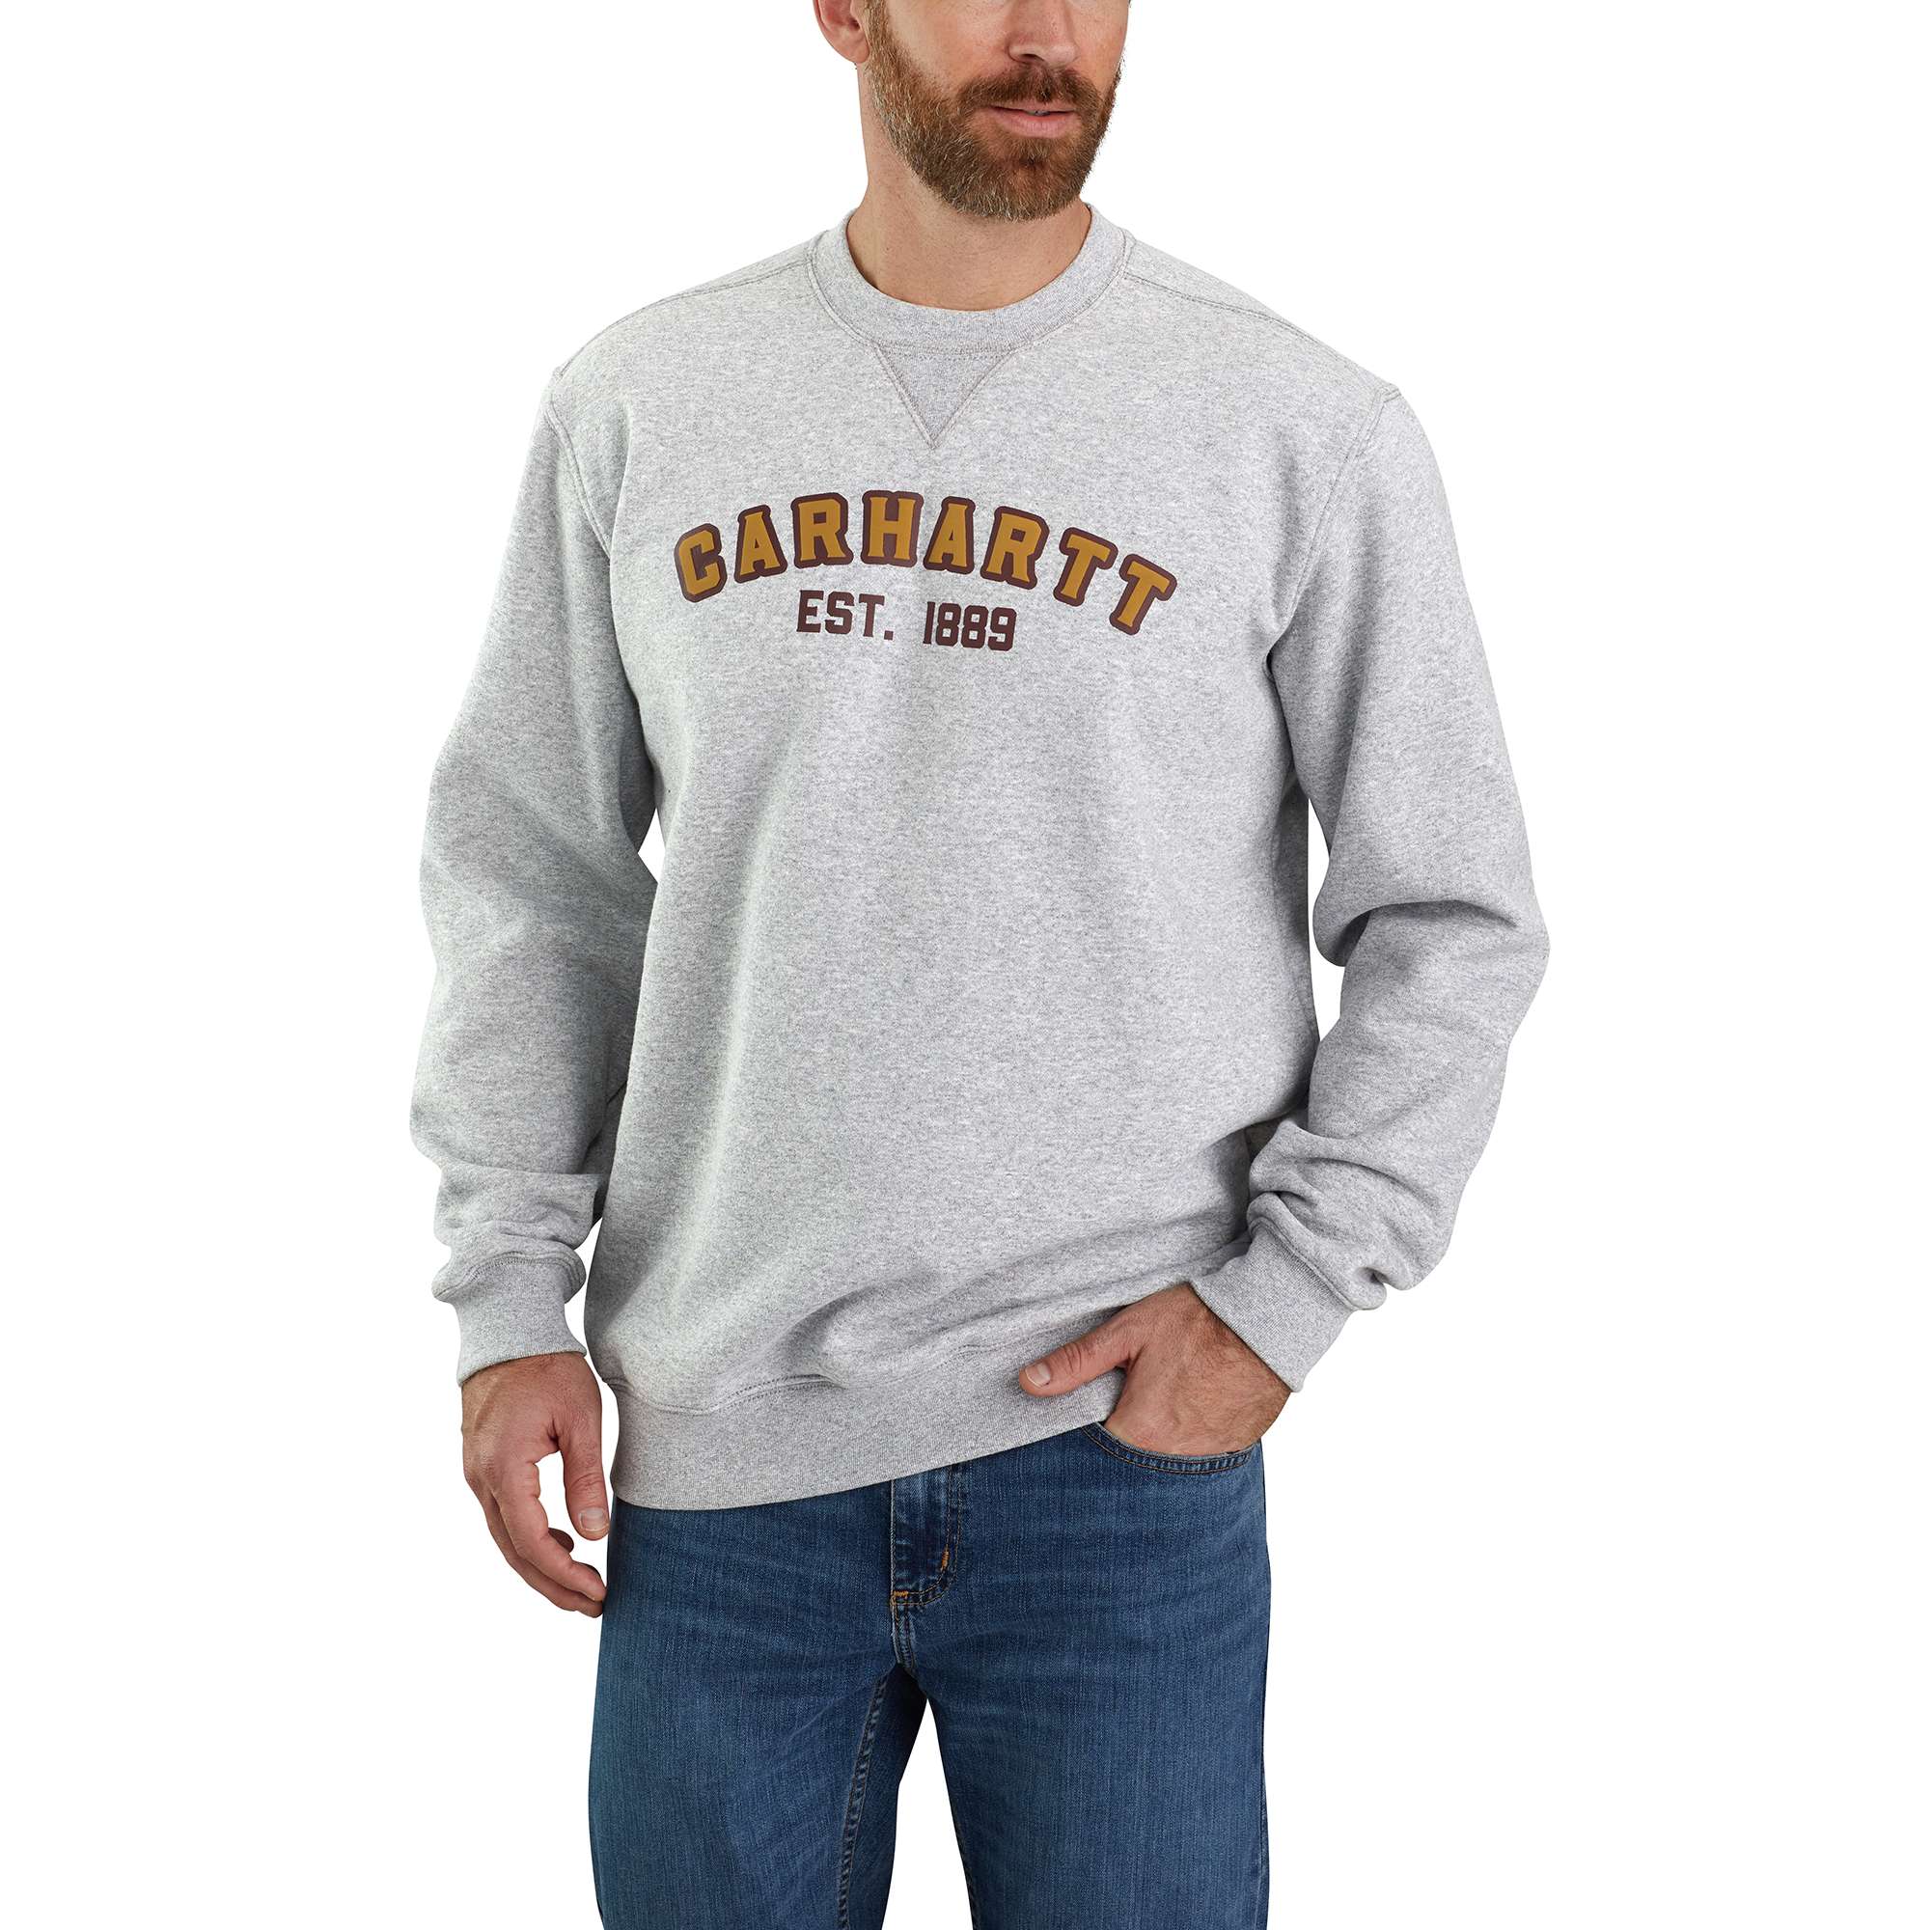 New Items: Men's Clothing, Accessories, & Gear | Carhartt